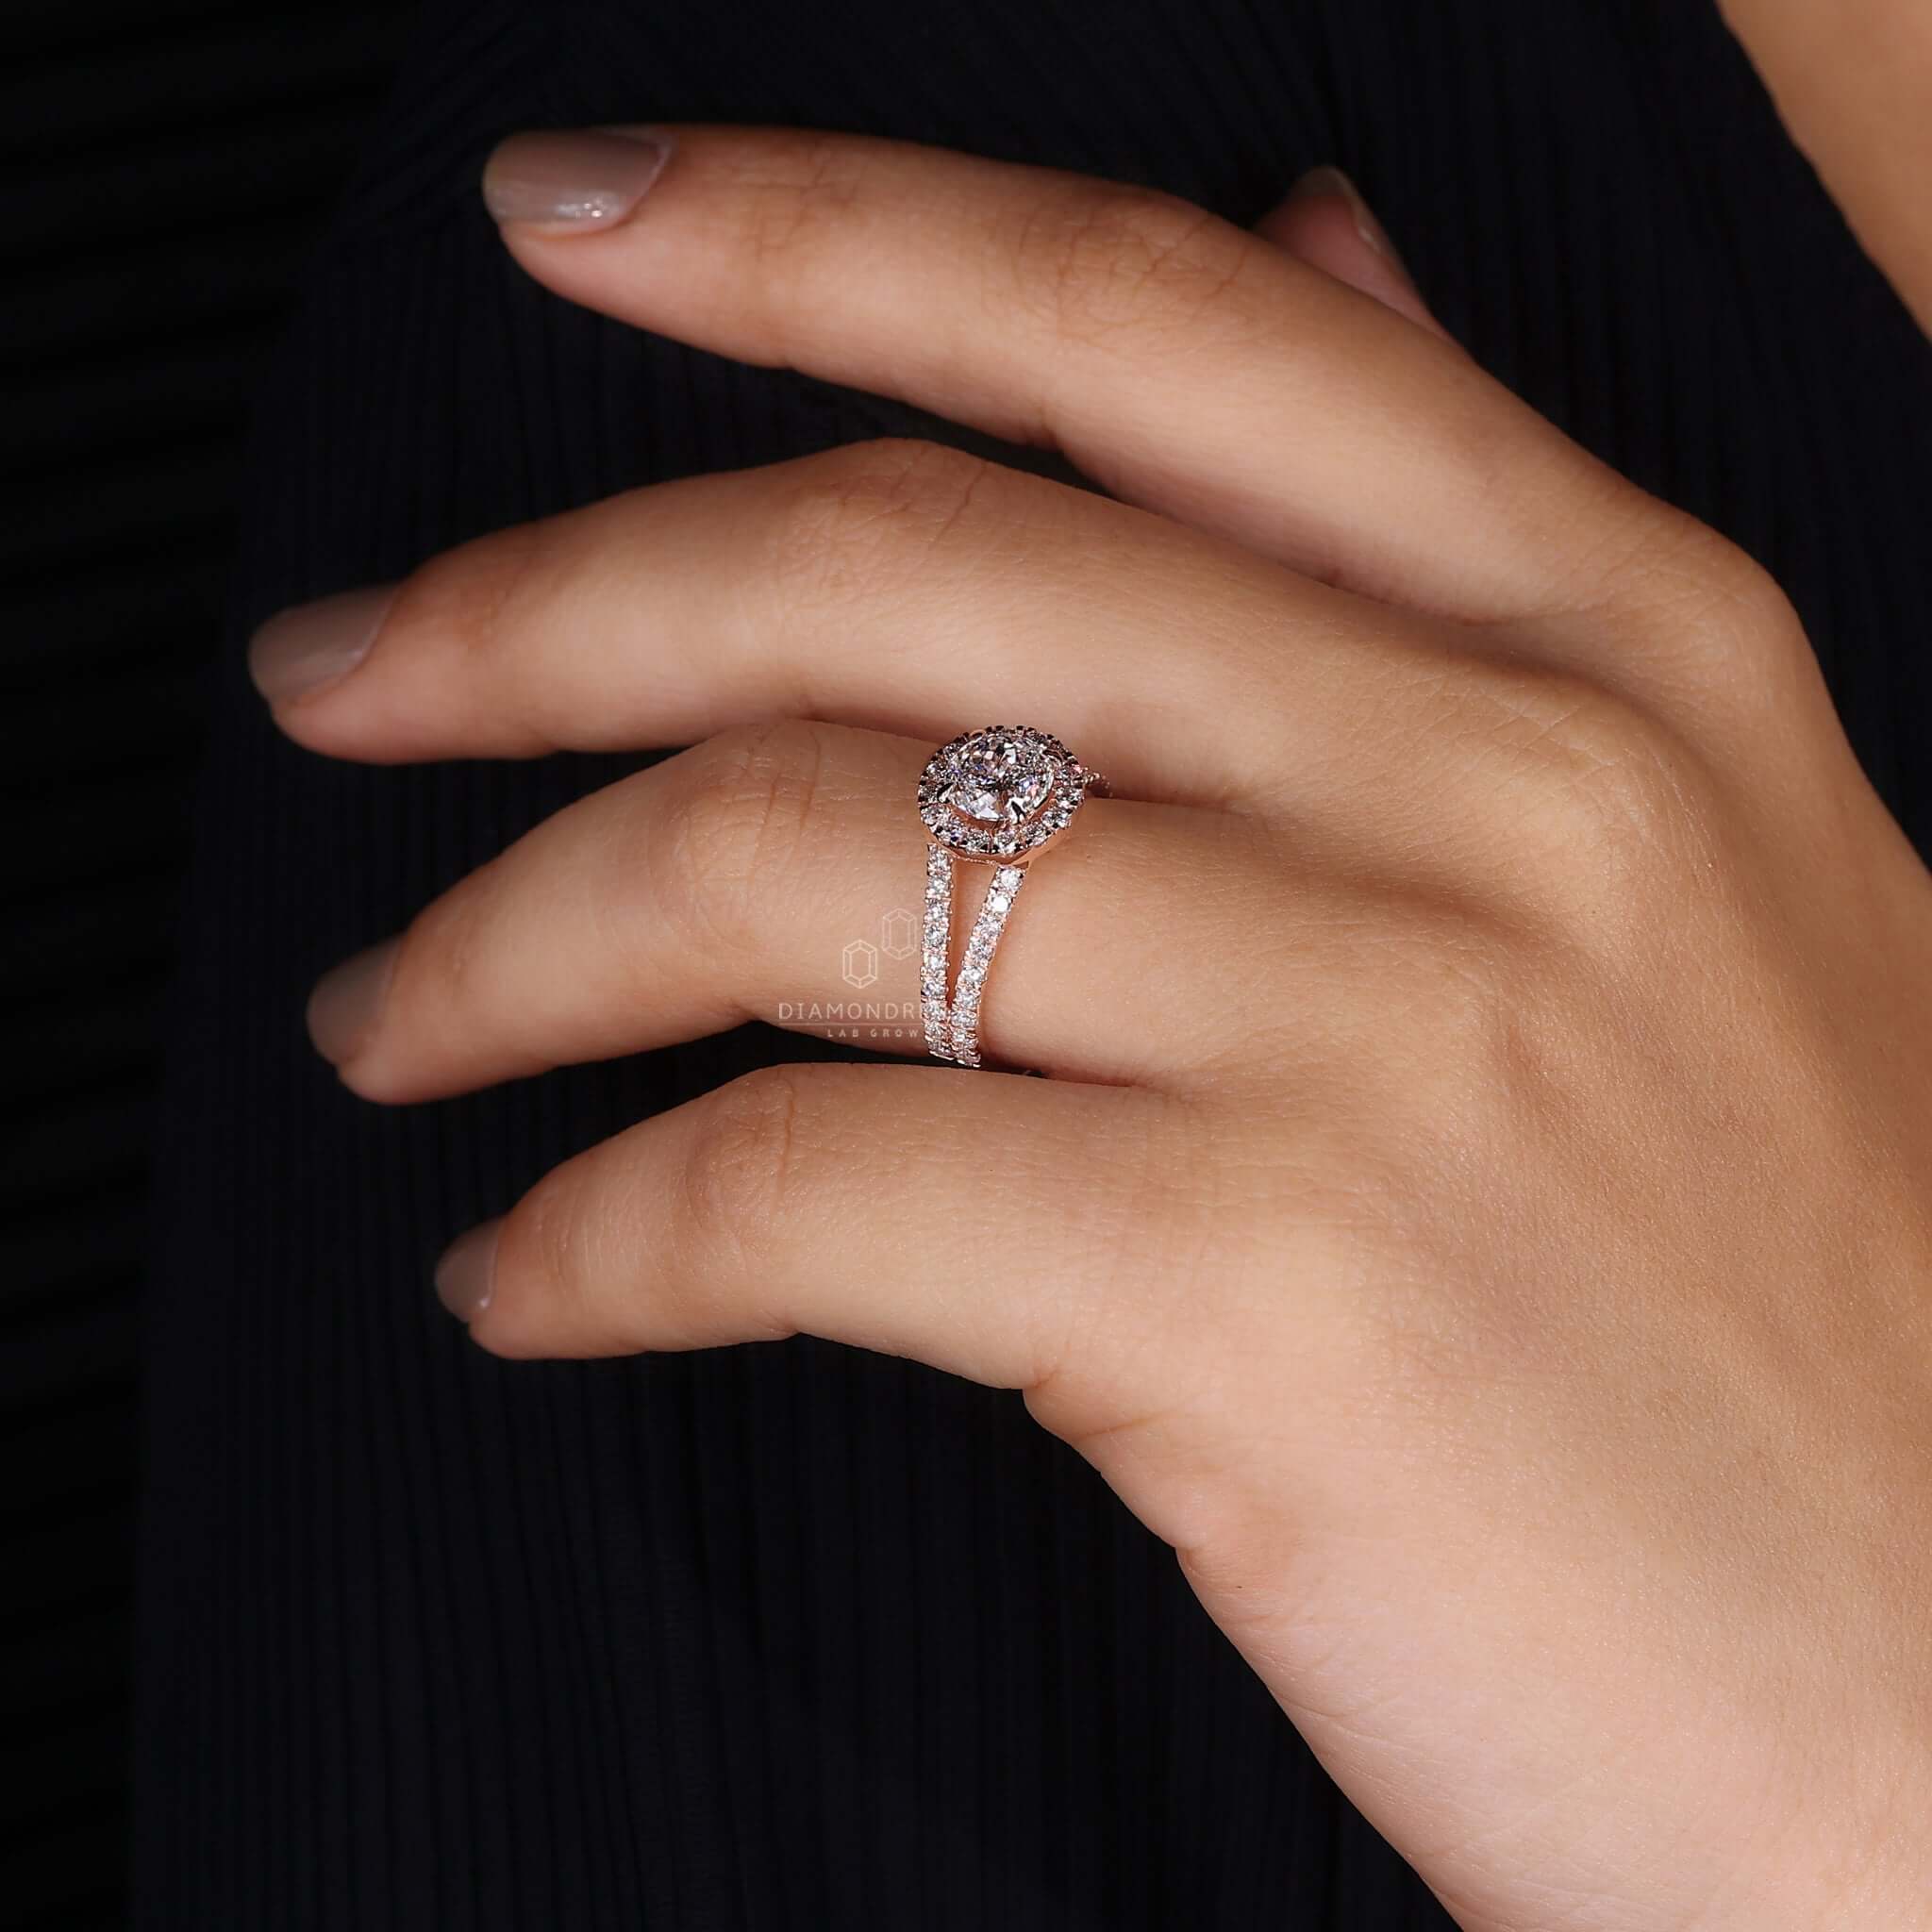 Close-up of split shank engagement ring on hand